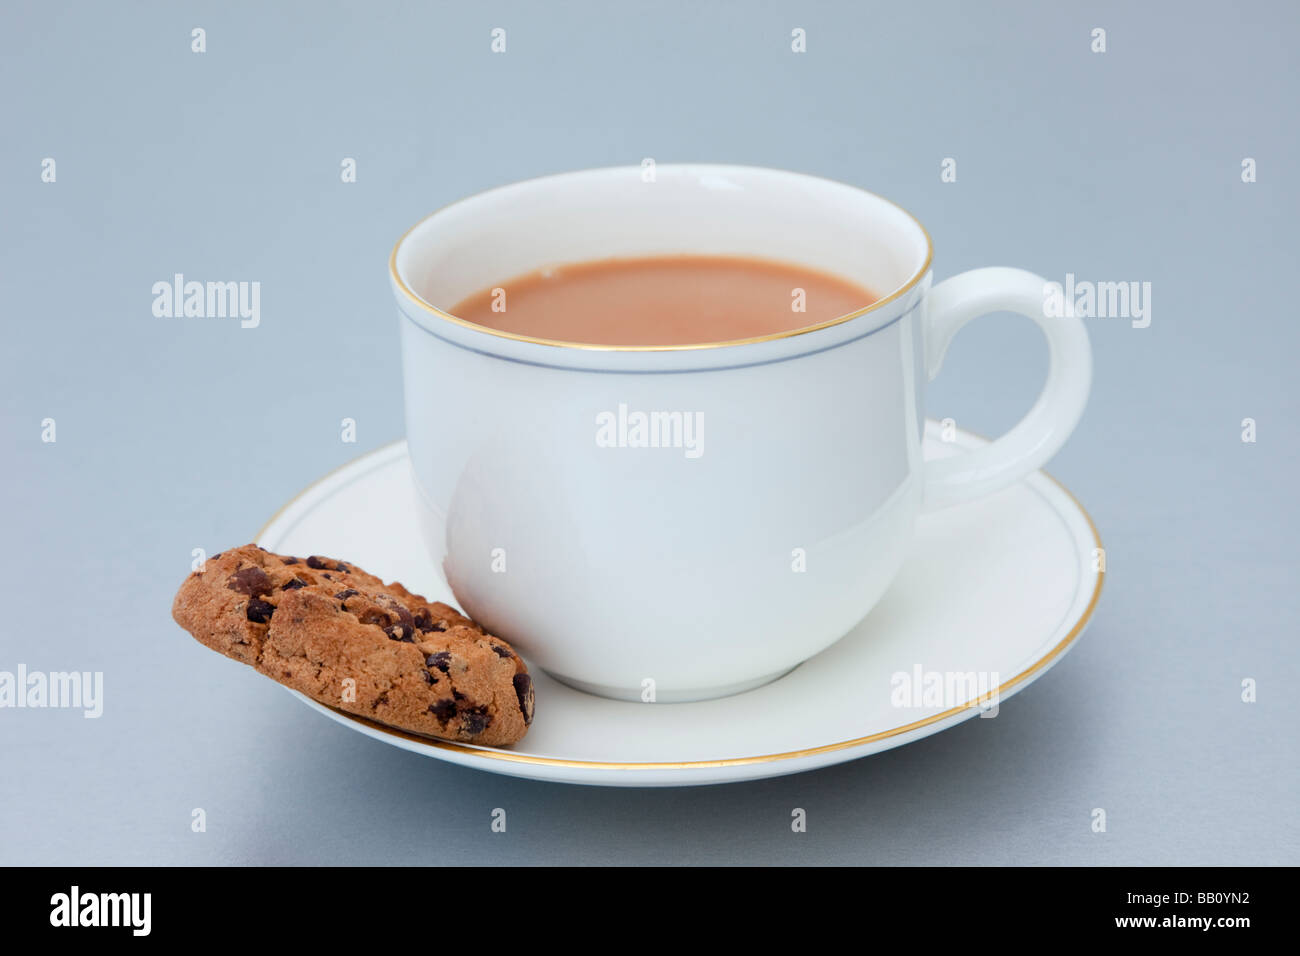 English tea cup and saucer with a chocolate chip biscuit on a plain backdrop. England UK Britain Stock Photo